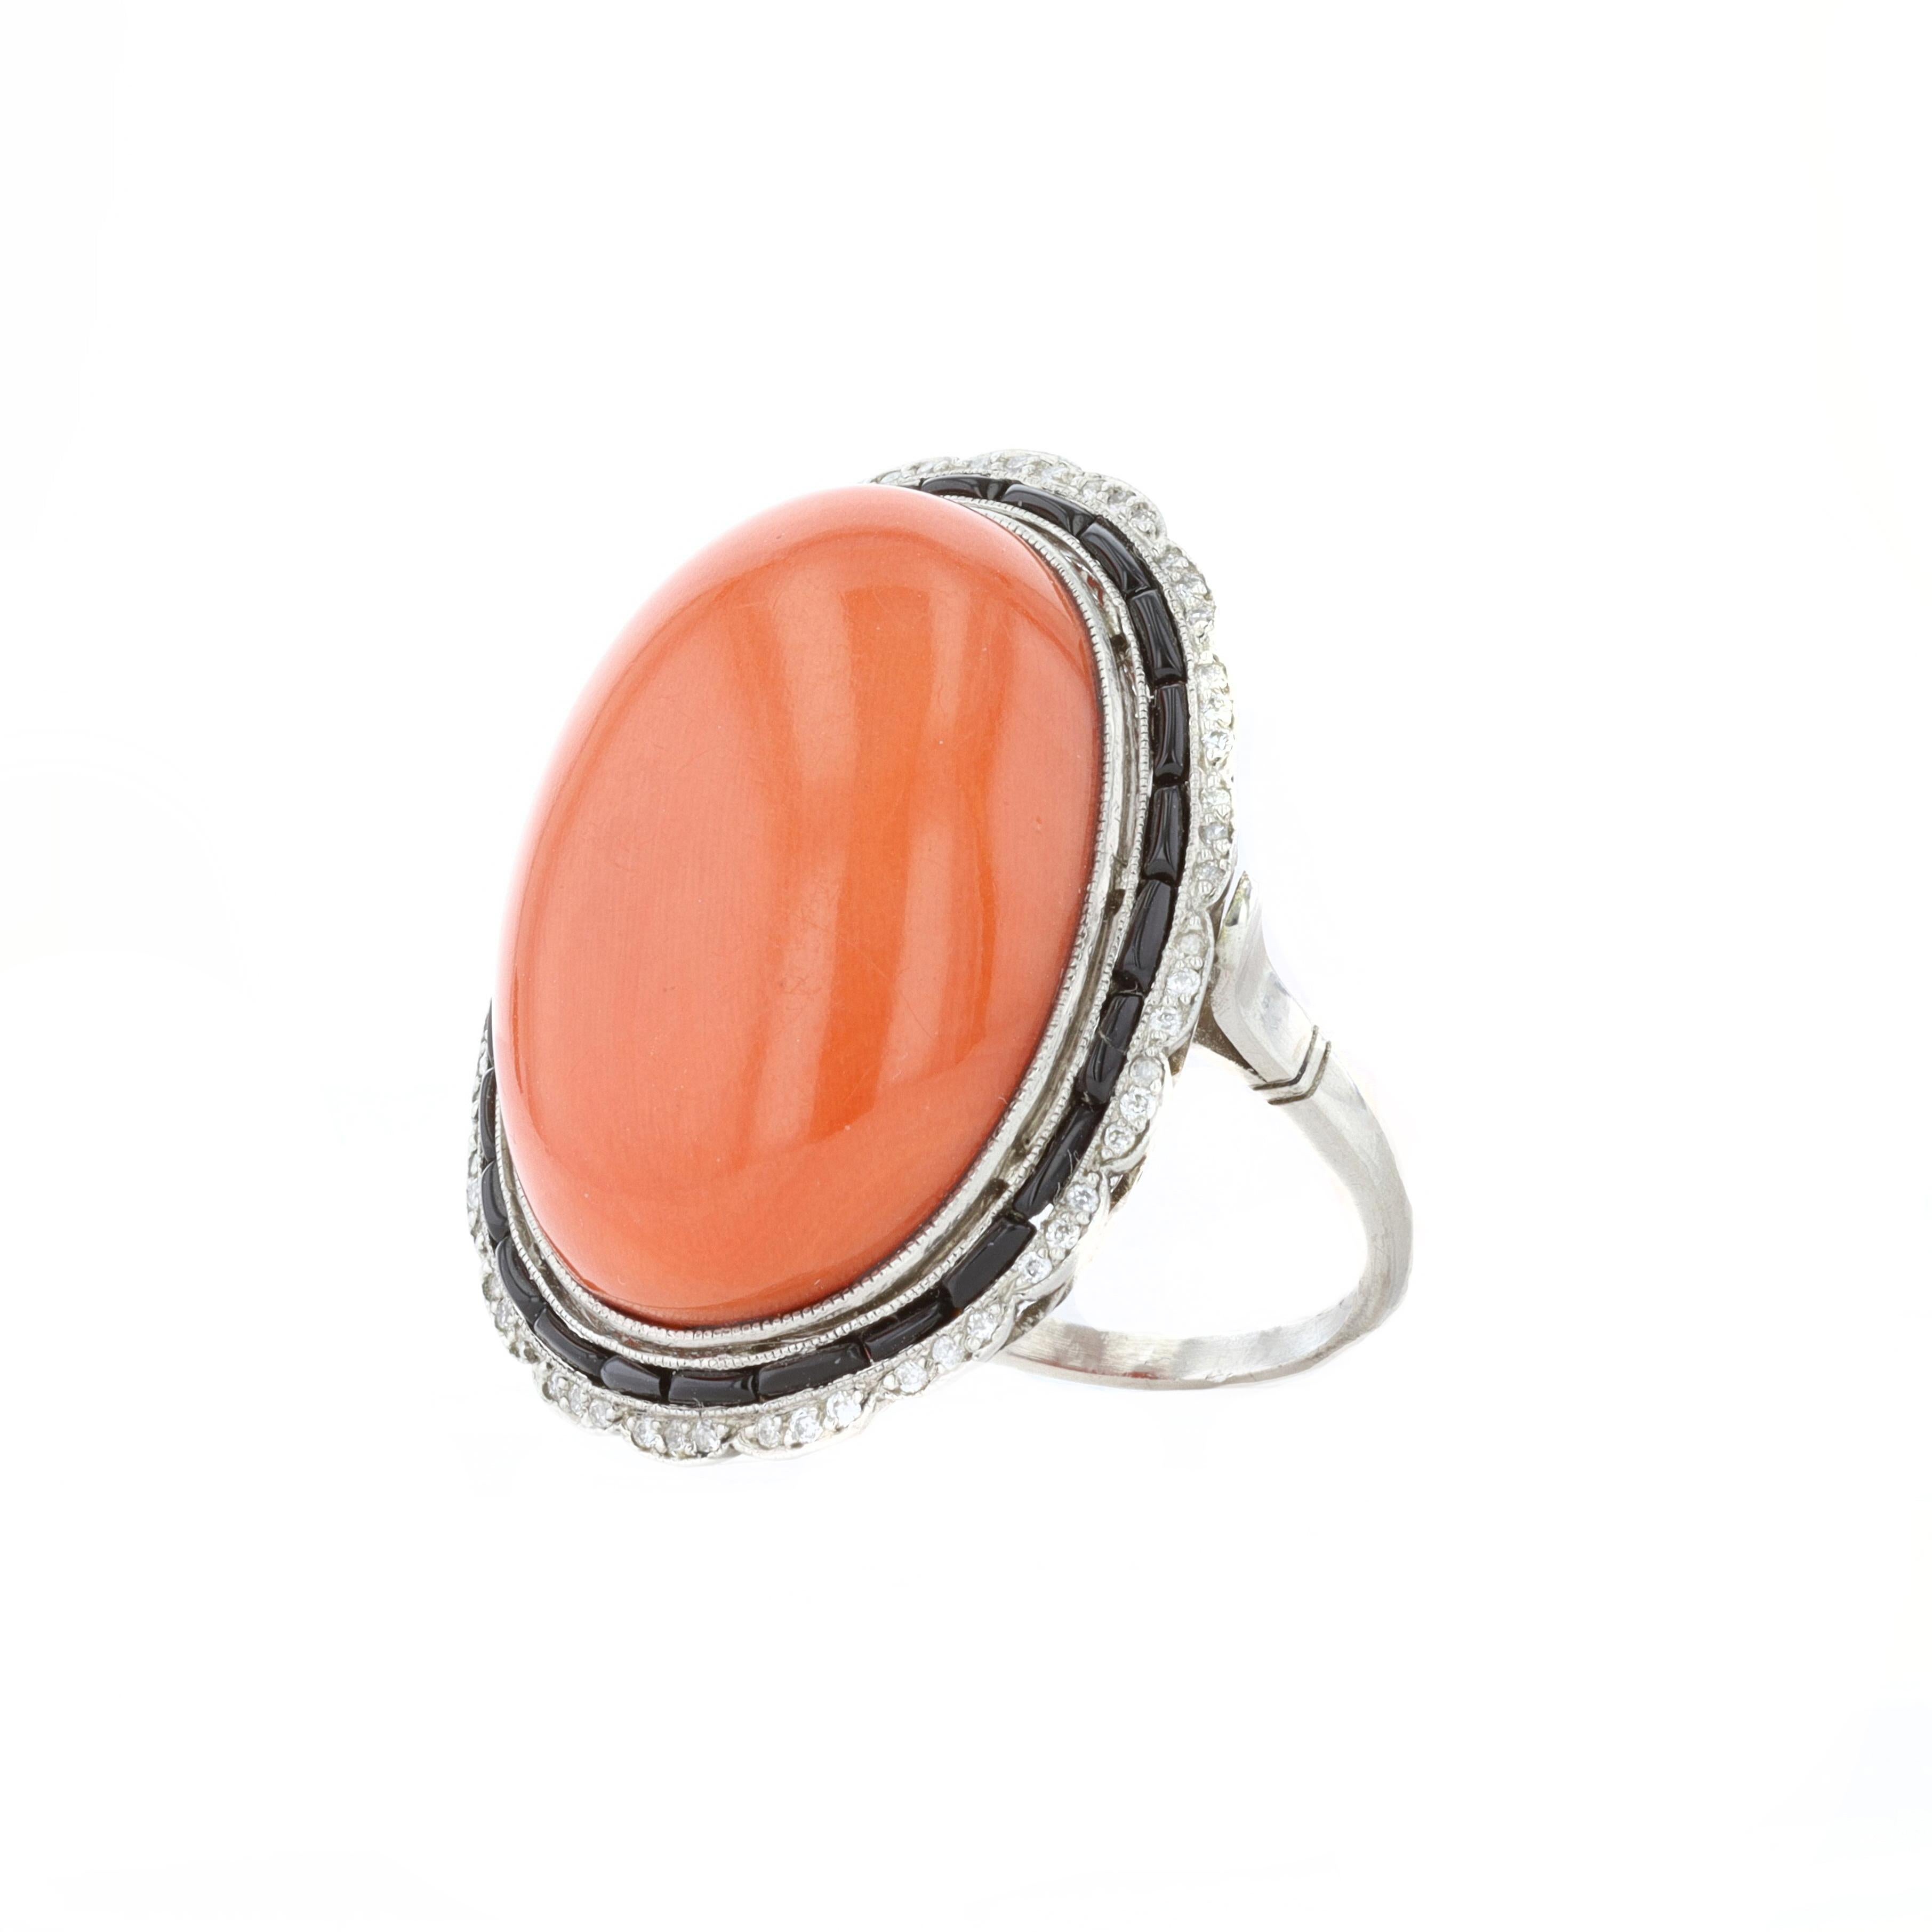 Vintage Cabachon Coral and Black Onyx Cocktail Ring 1